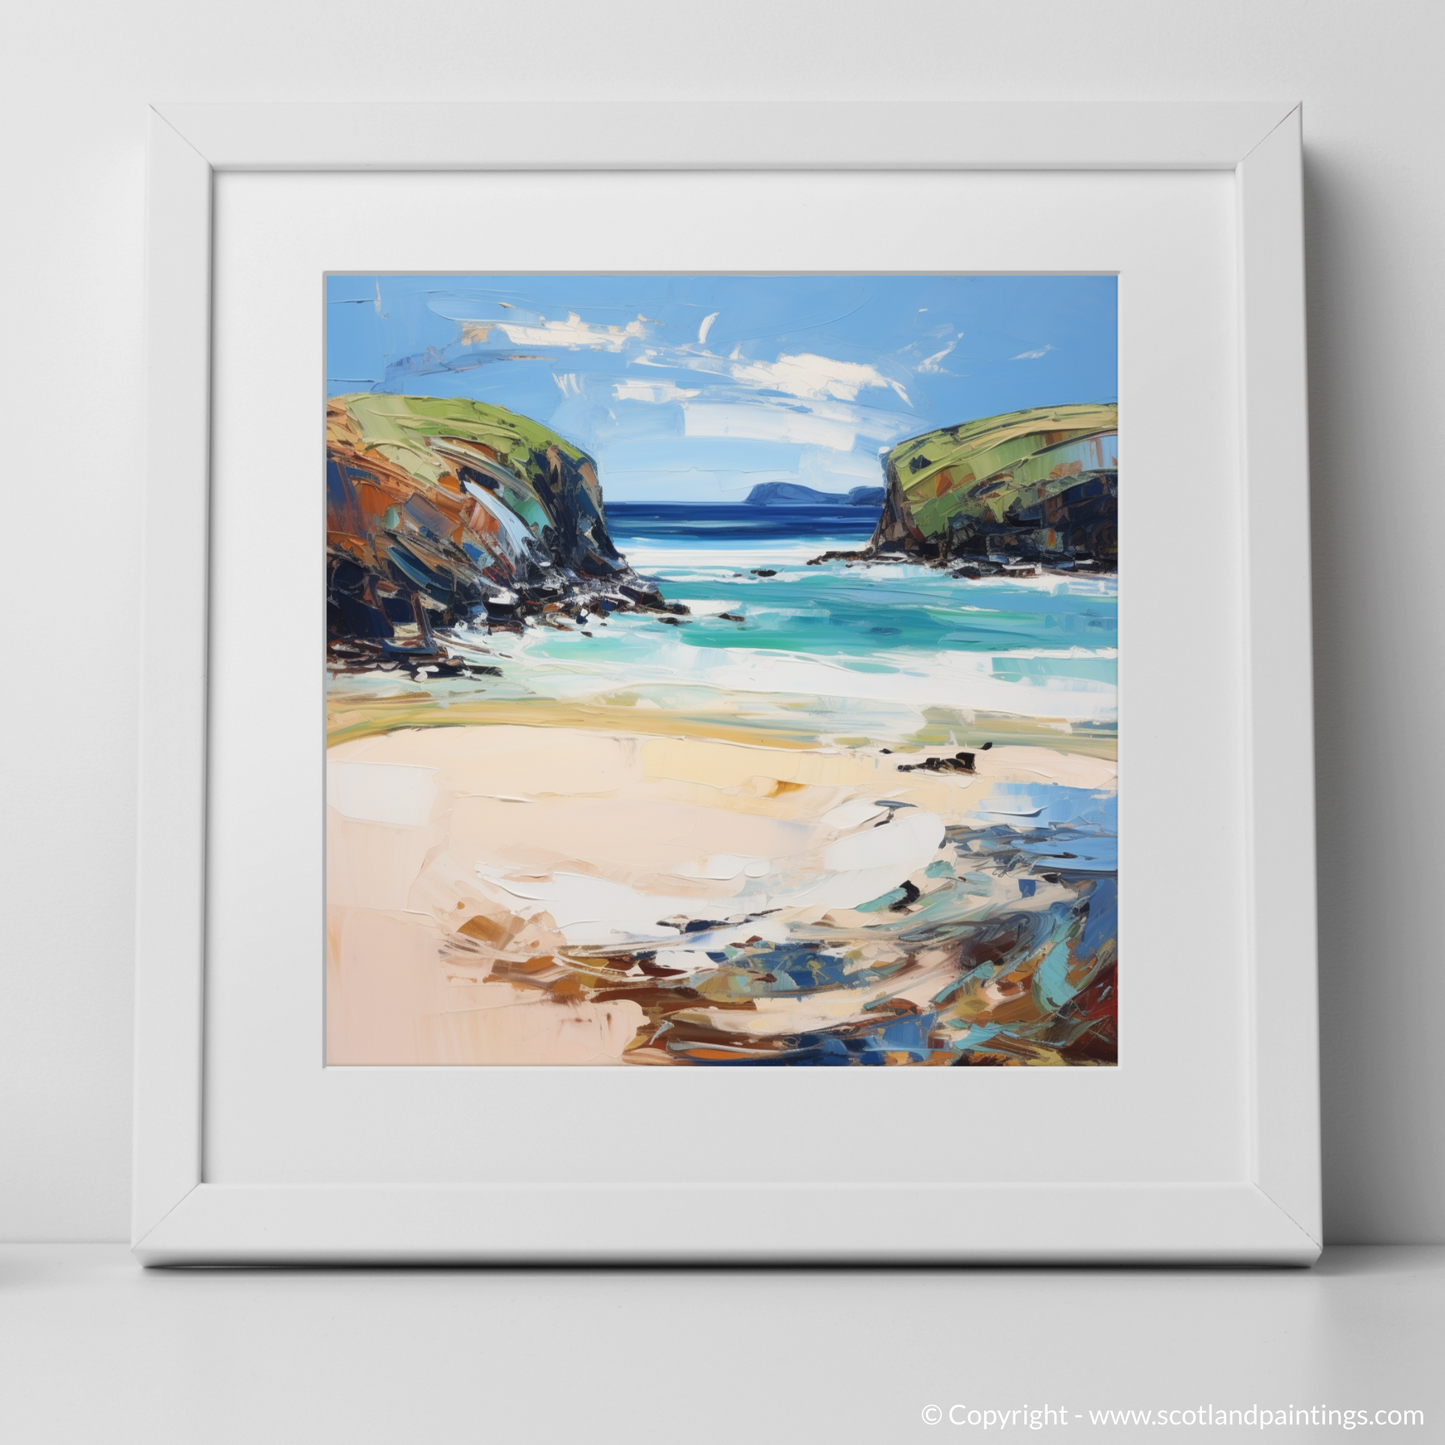 Art Print of Sandwood Bay, Sutherland with a white frame